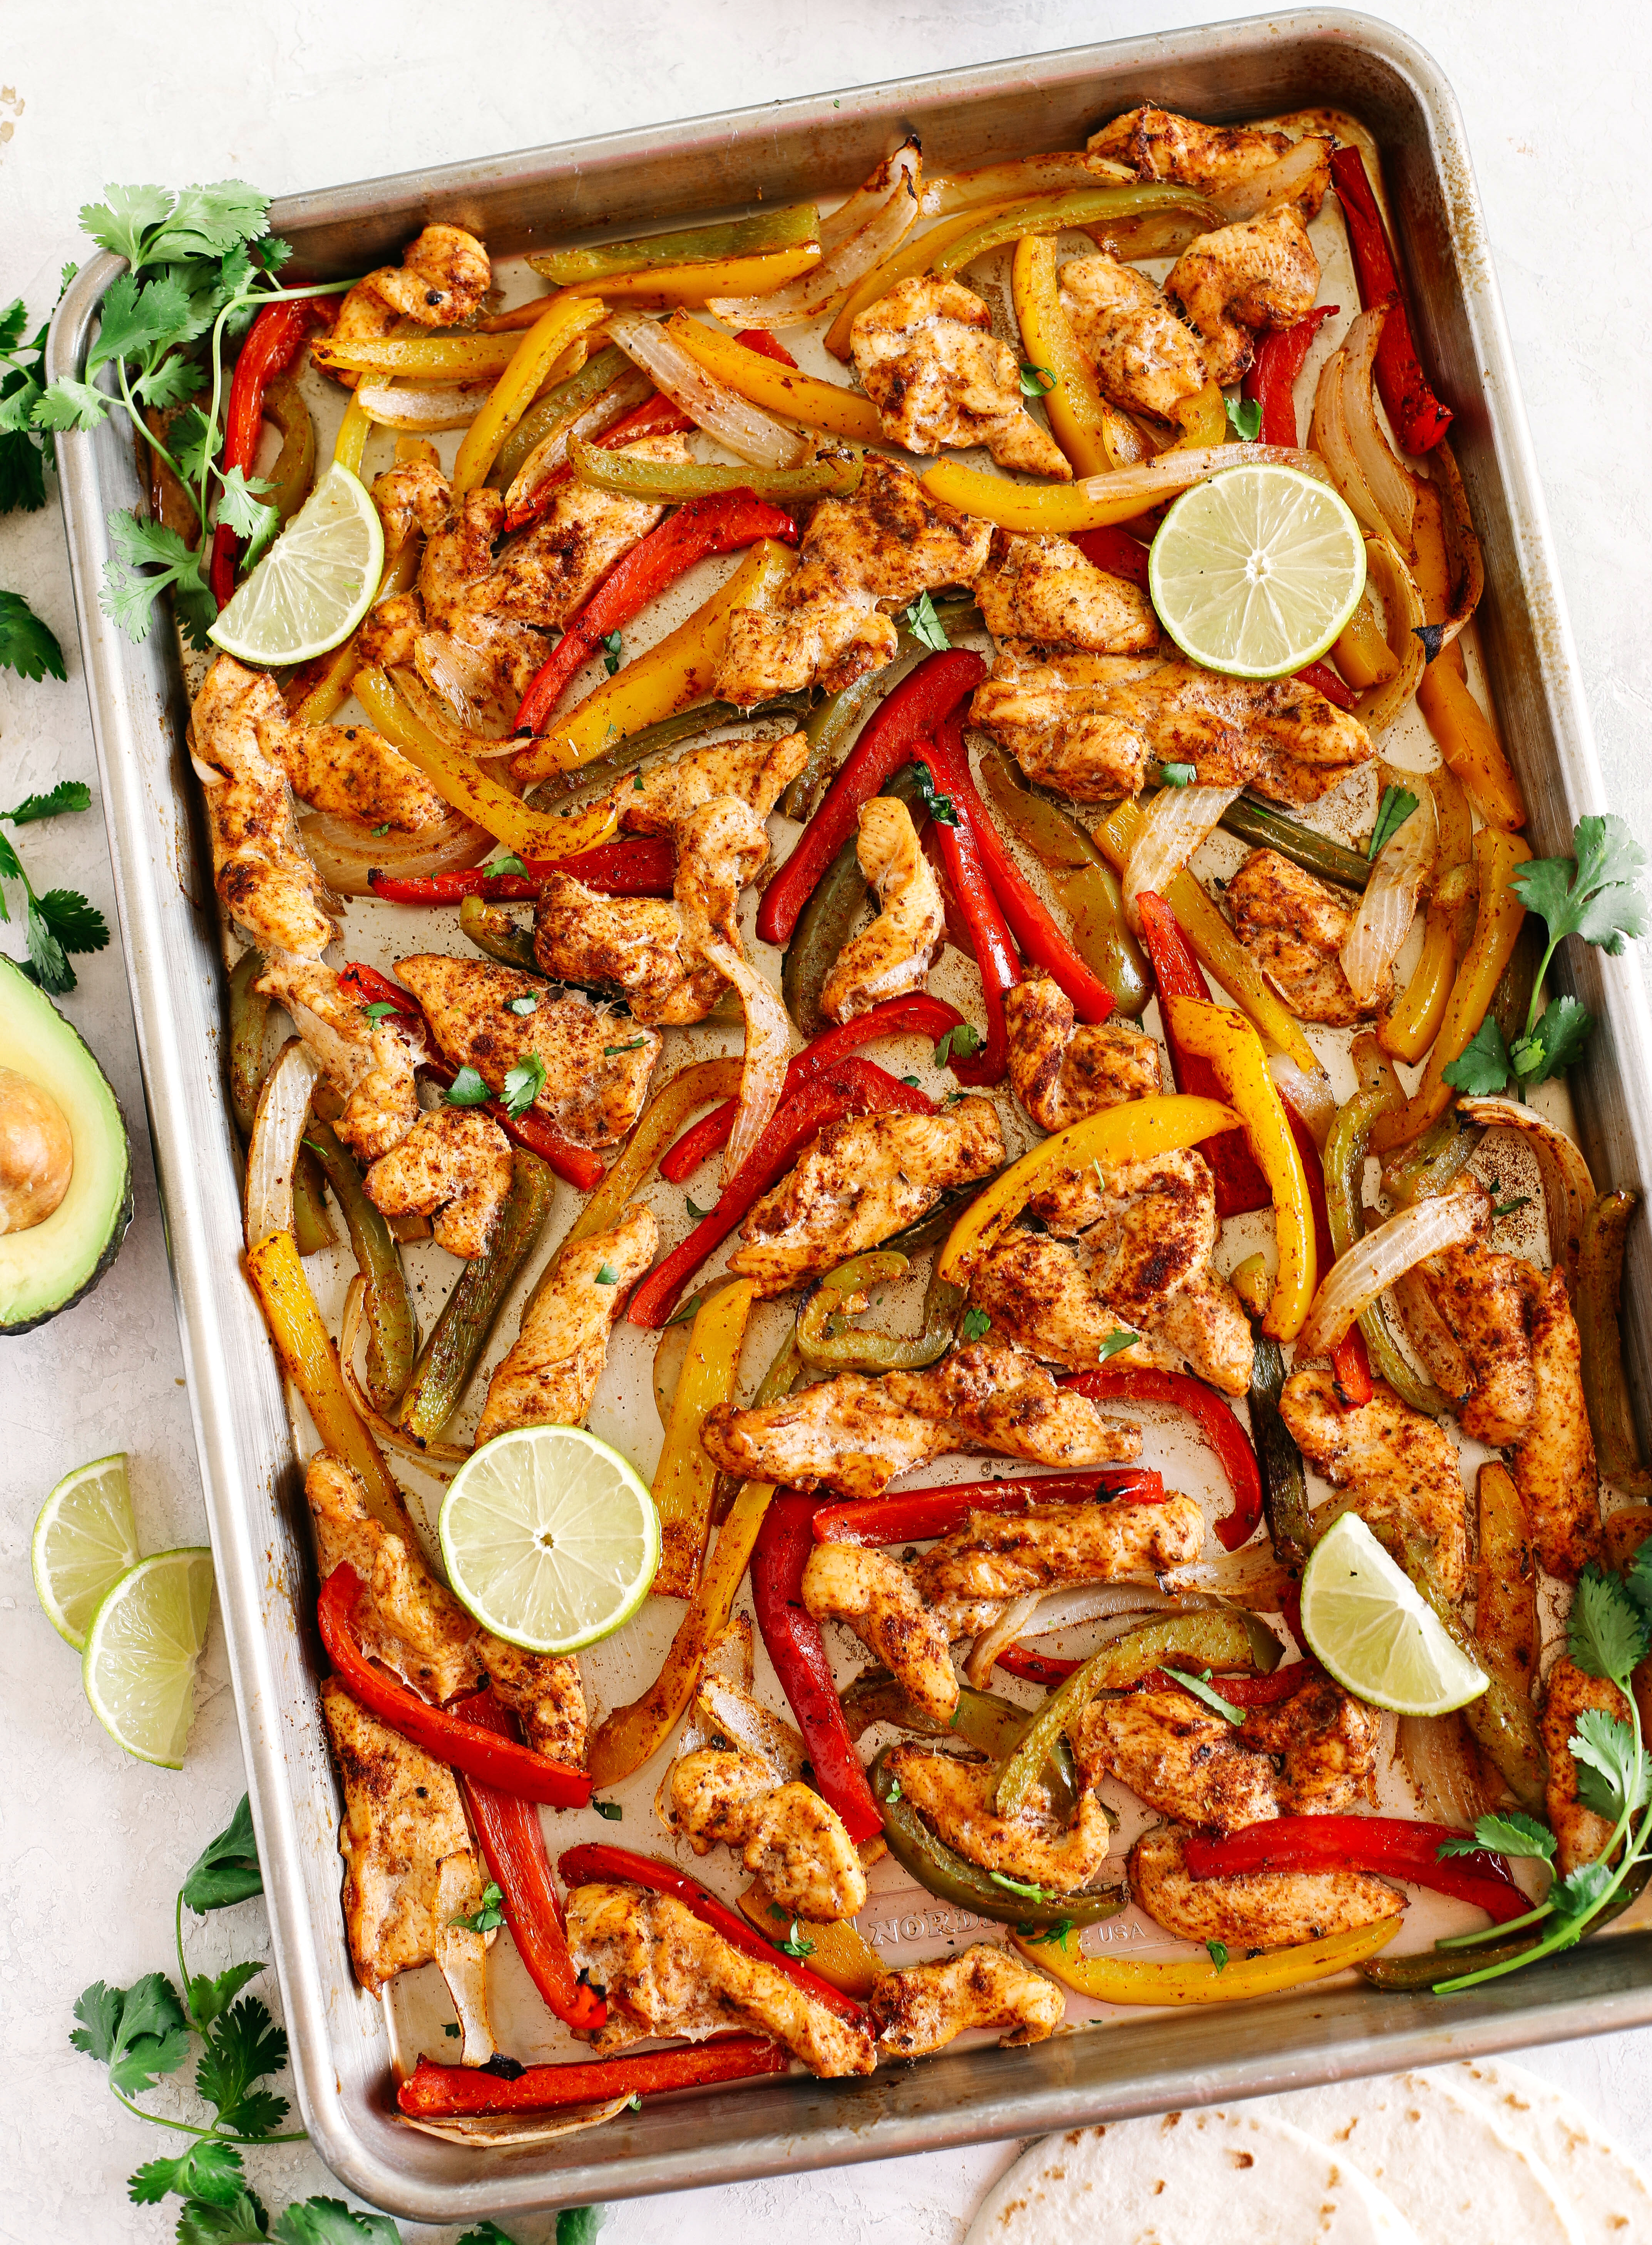 EASY Sheet Pan Chicken Fajitas with all your favorite Mexican flavors that makes the perfect healthy weeknight dinner easily made all on one pan in under 30 minutes!  Perfect recipe for your Sunday meal prep too!  